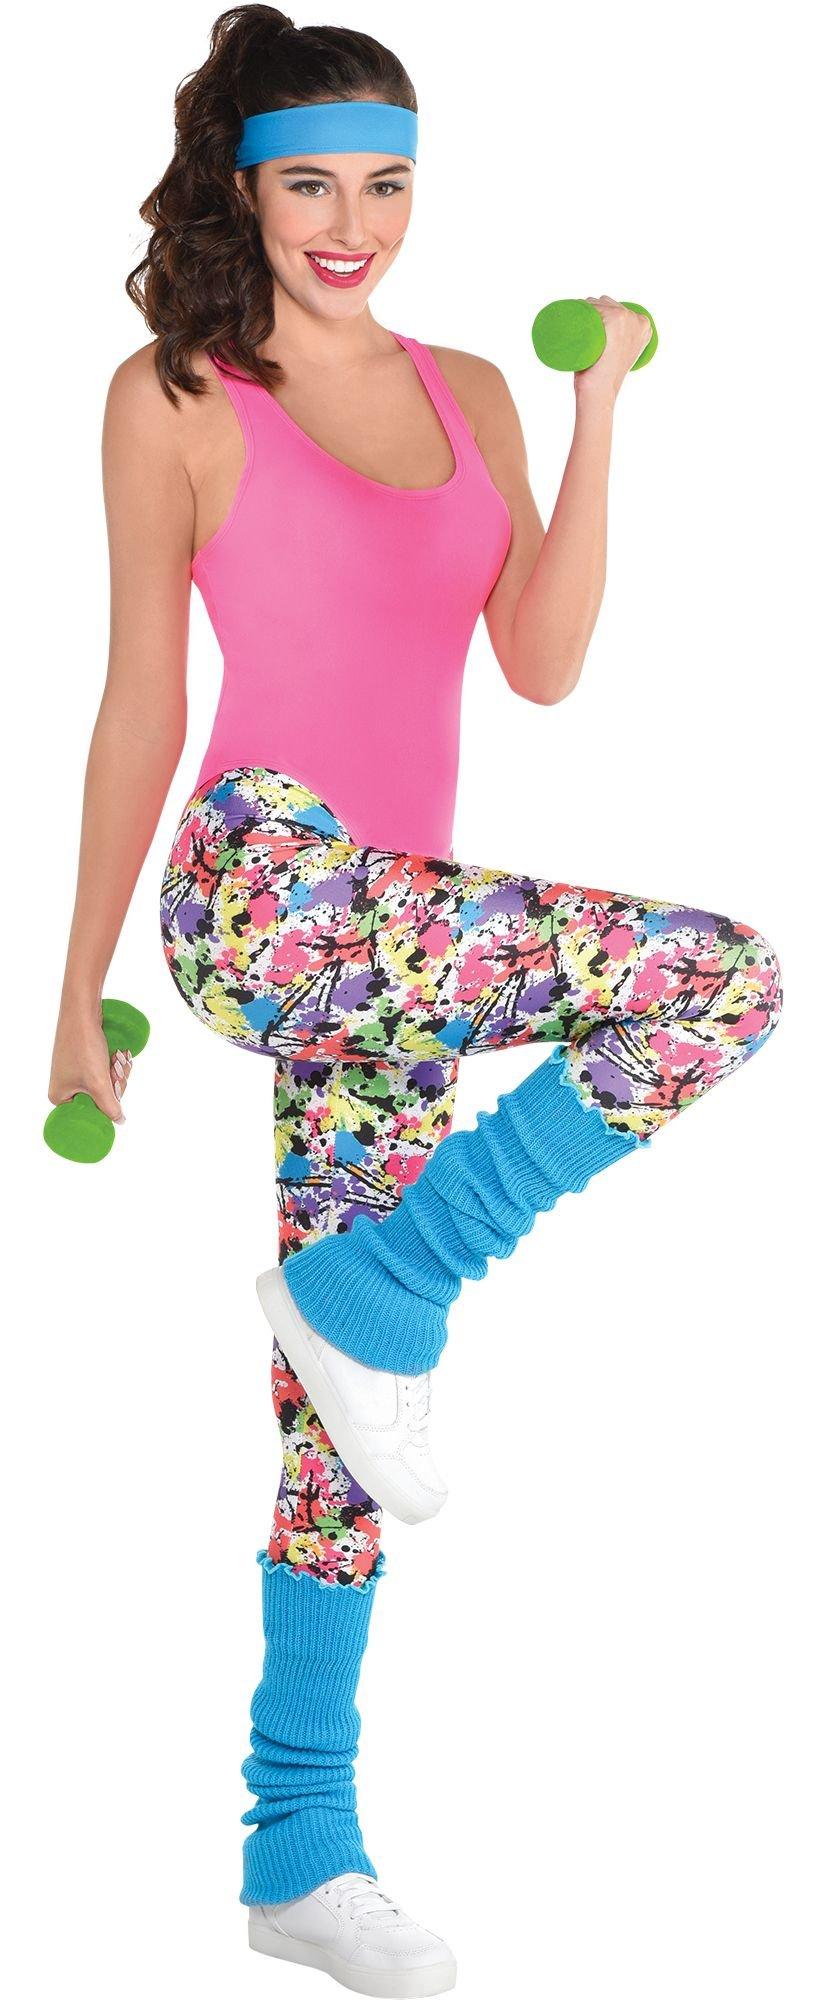 Jazzercise - Wondering what types of gear to rock in the fall? Not